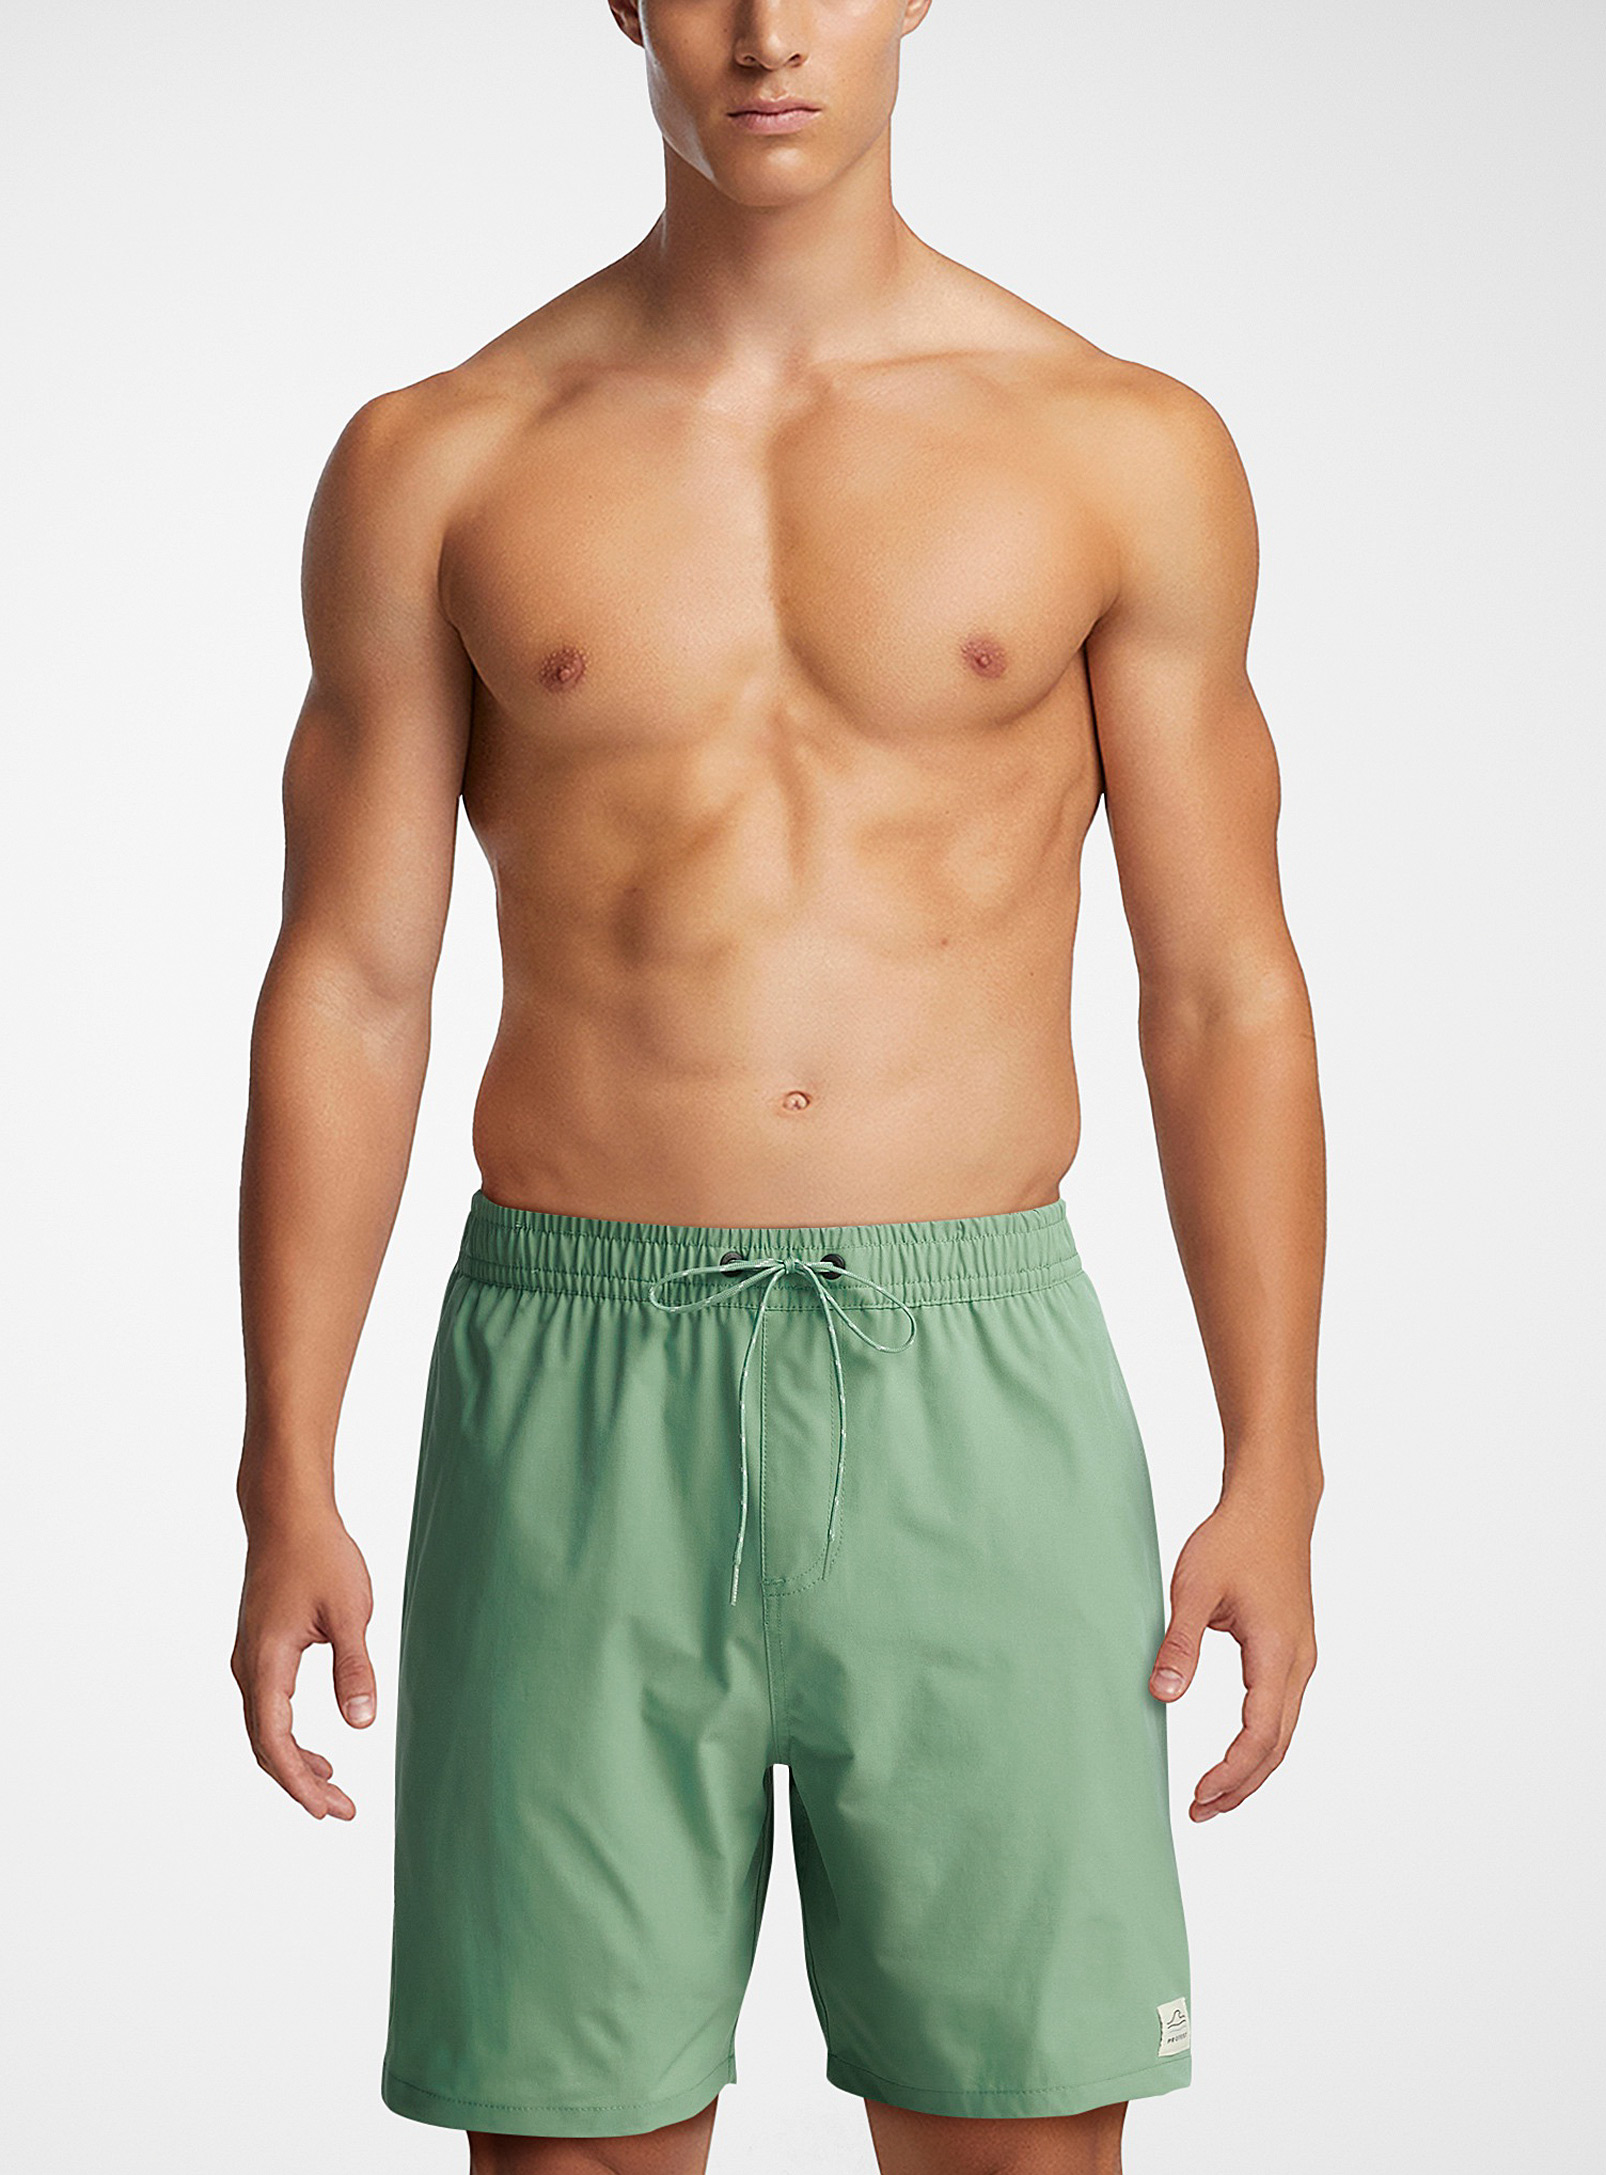 I.fiv5 Solid Long Swim Trunk In Green